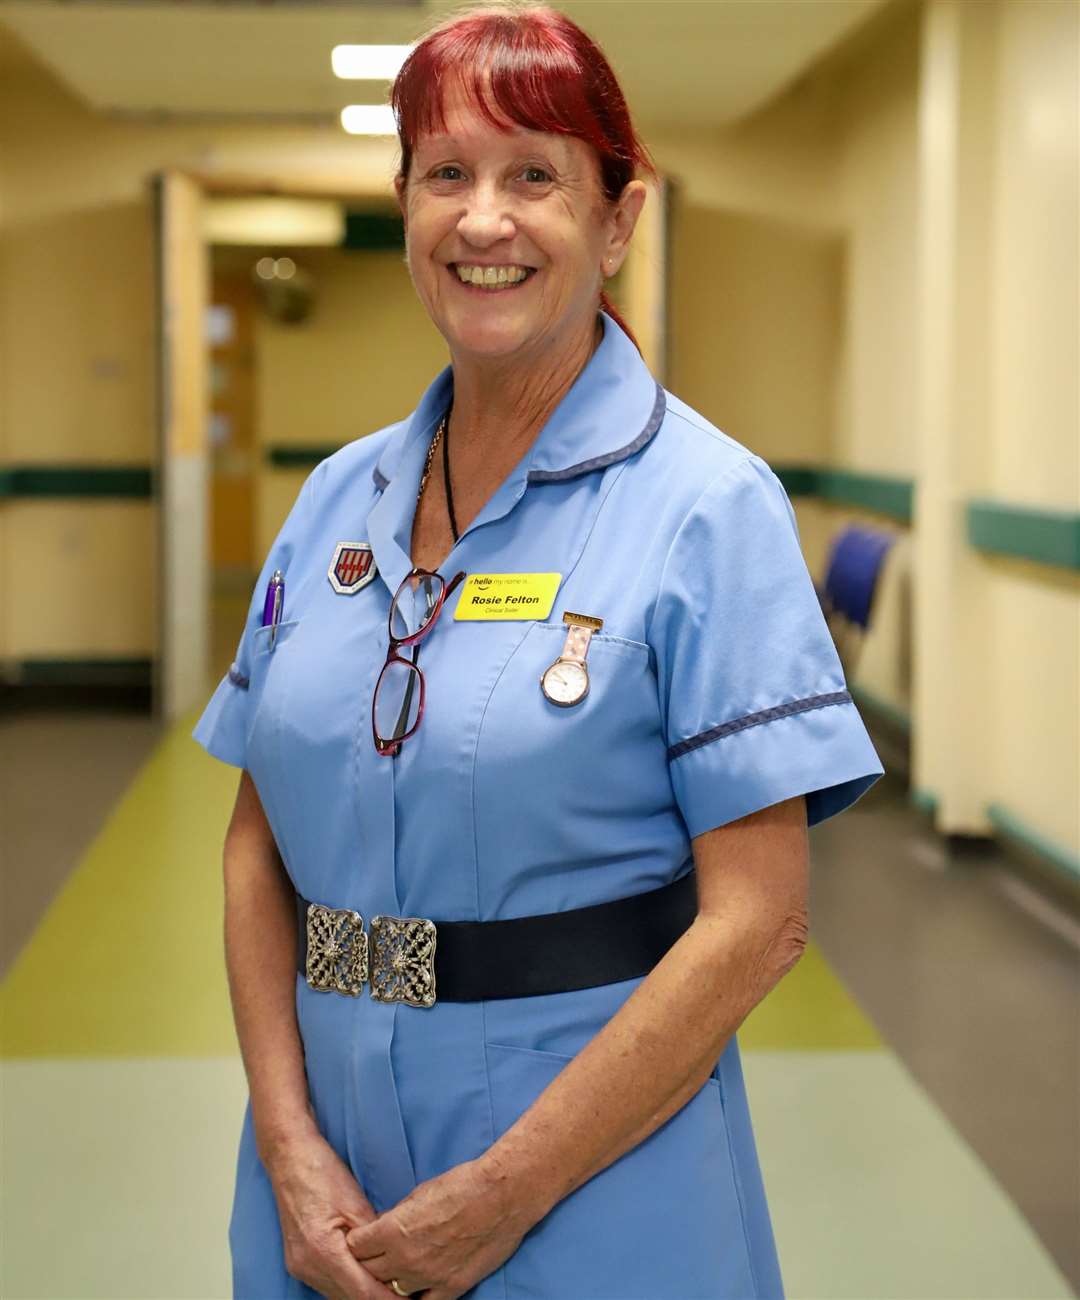 She currently represents the Sunderland Day Case Centre team as Clinical Sister.